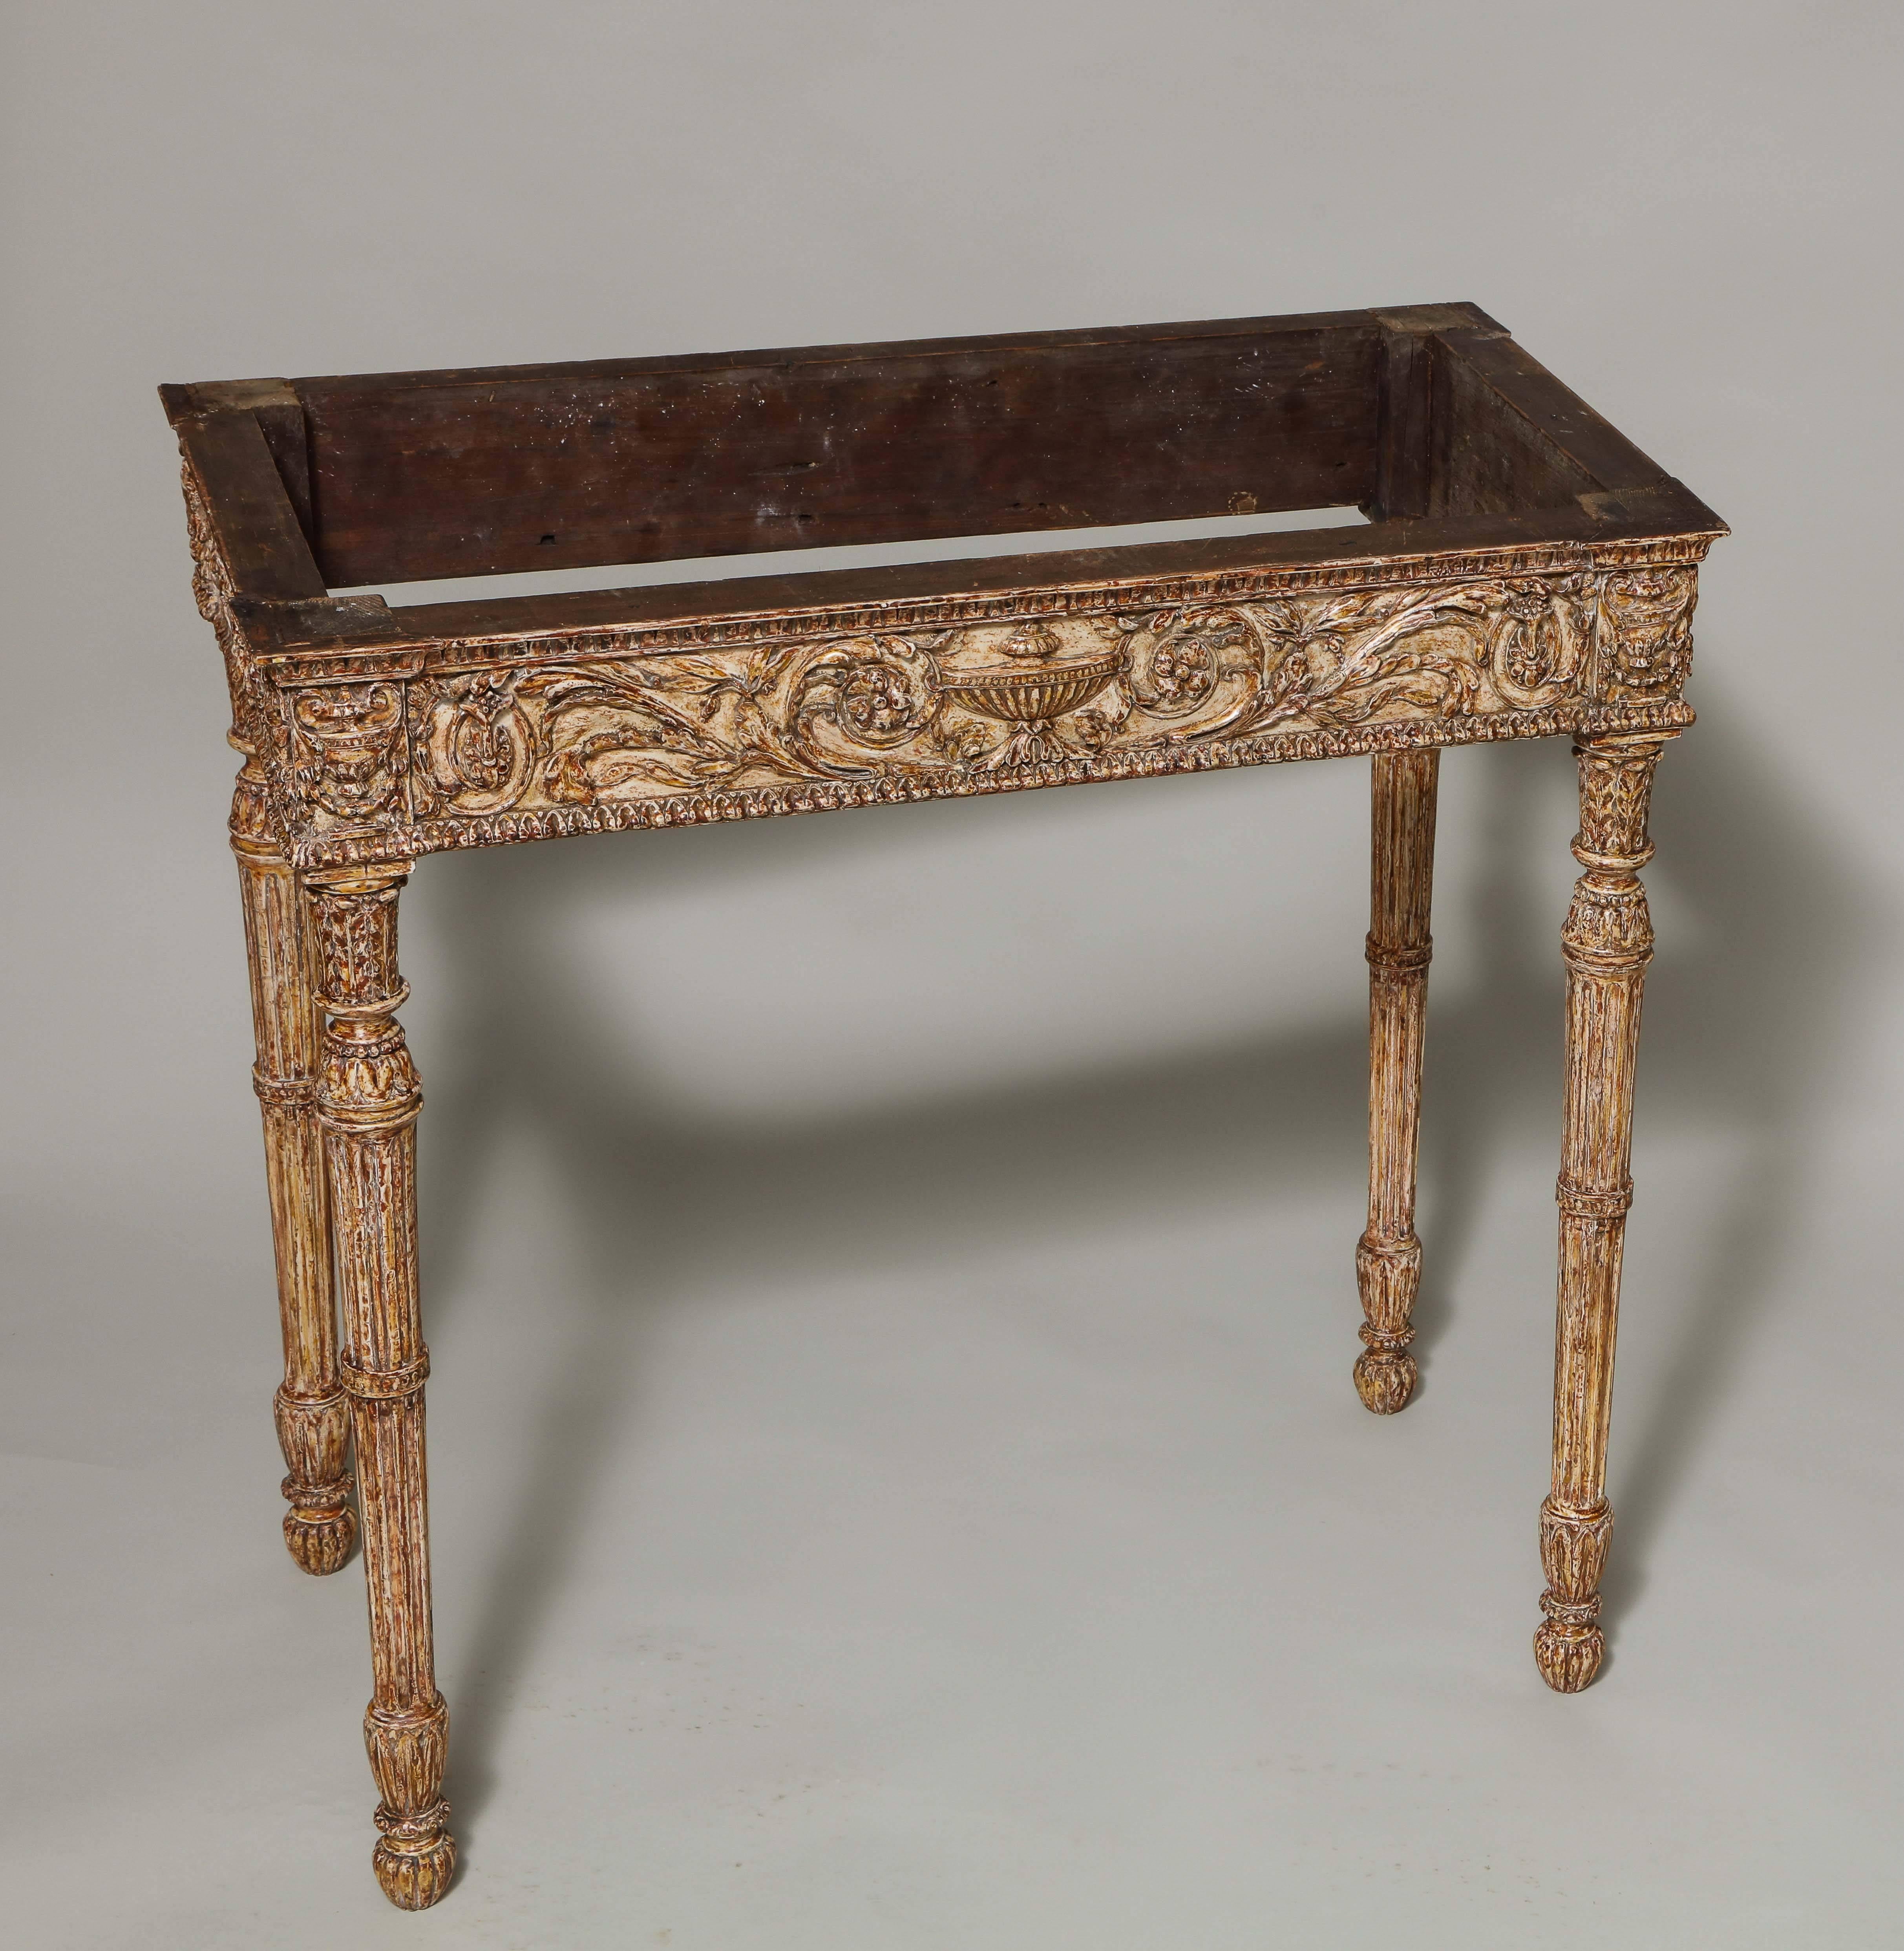 Very fine pair of English 19th century marble top console tables, the shaped tops with inset painted borders with honeysuckle and husk design, the centre with panels with classical figures, over carved aprons with urns, bell flowers and trailing